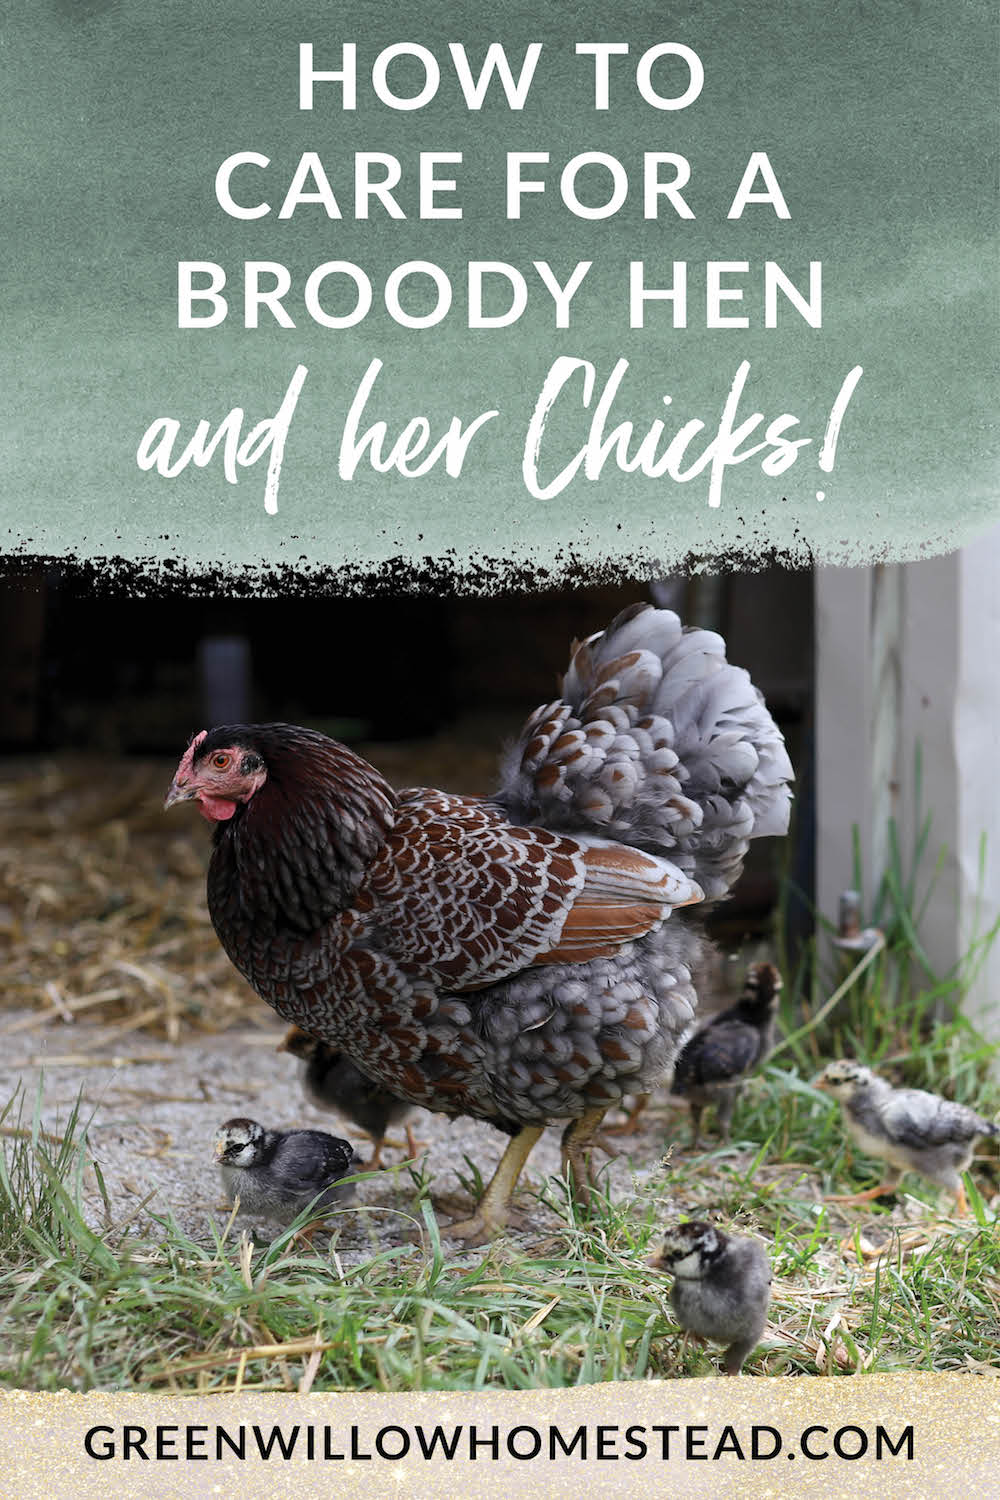 How to care for a broody hen and her chicks